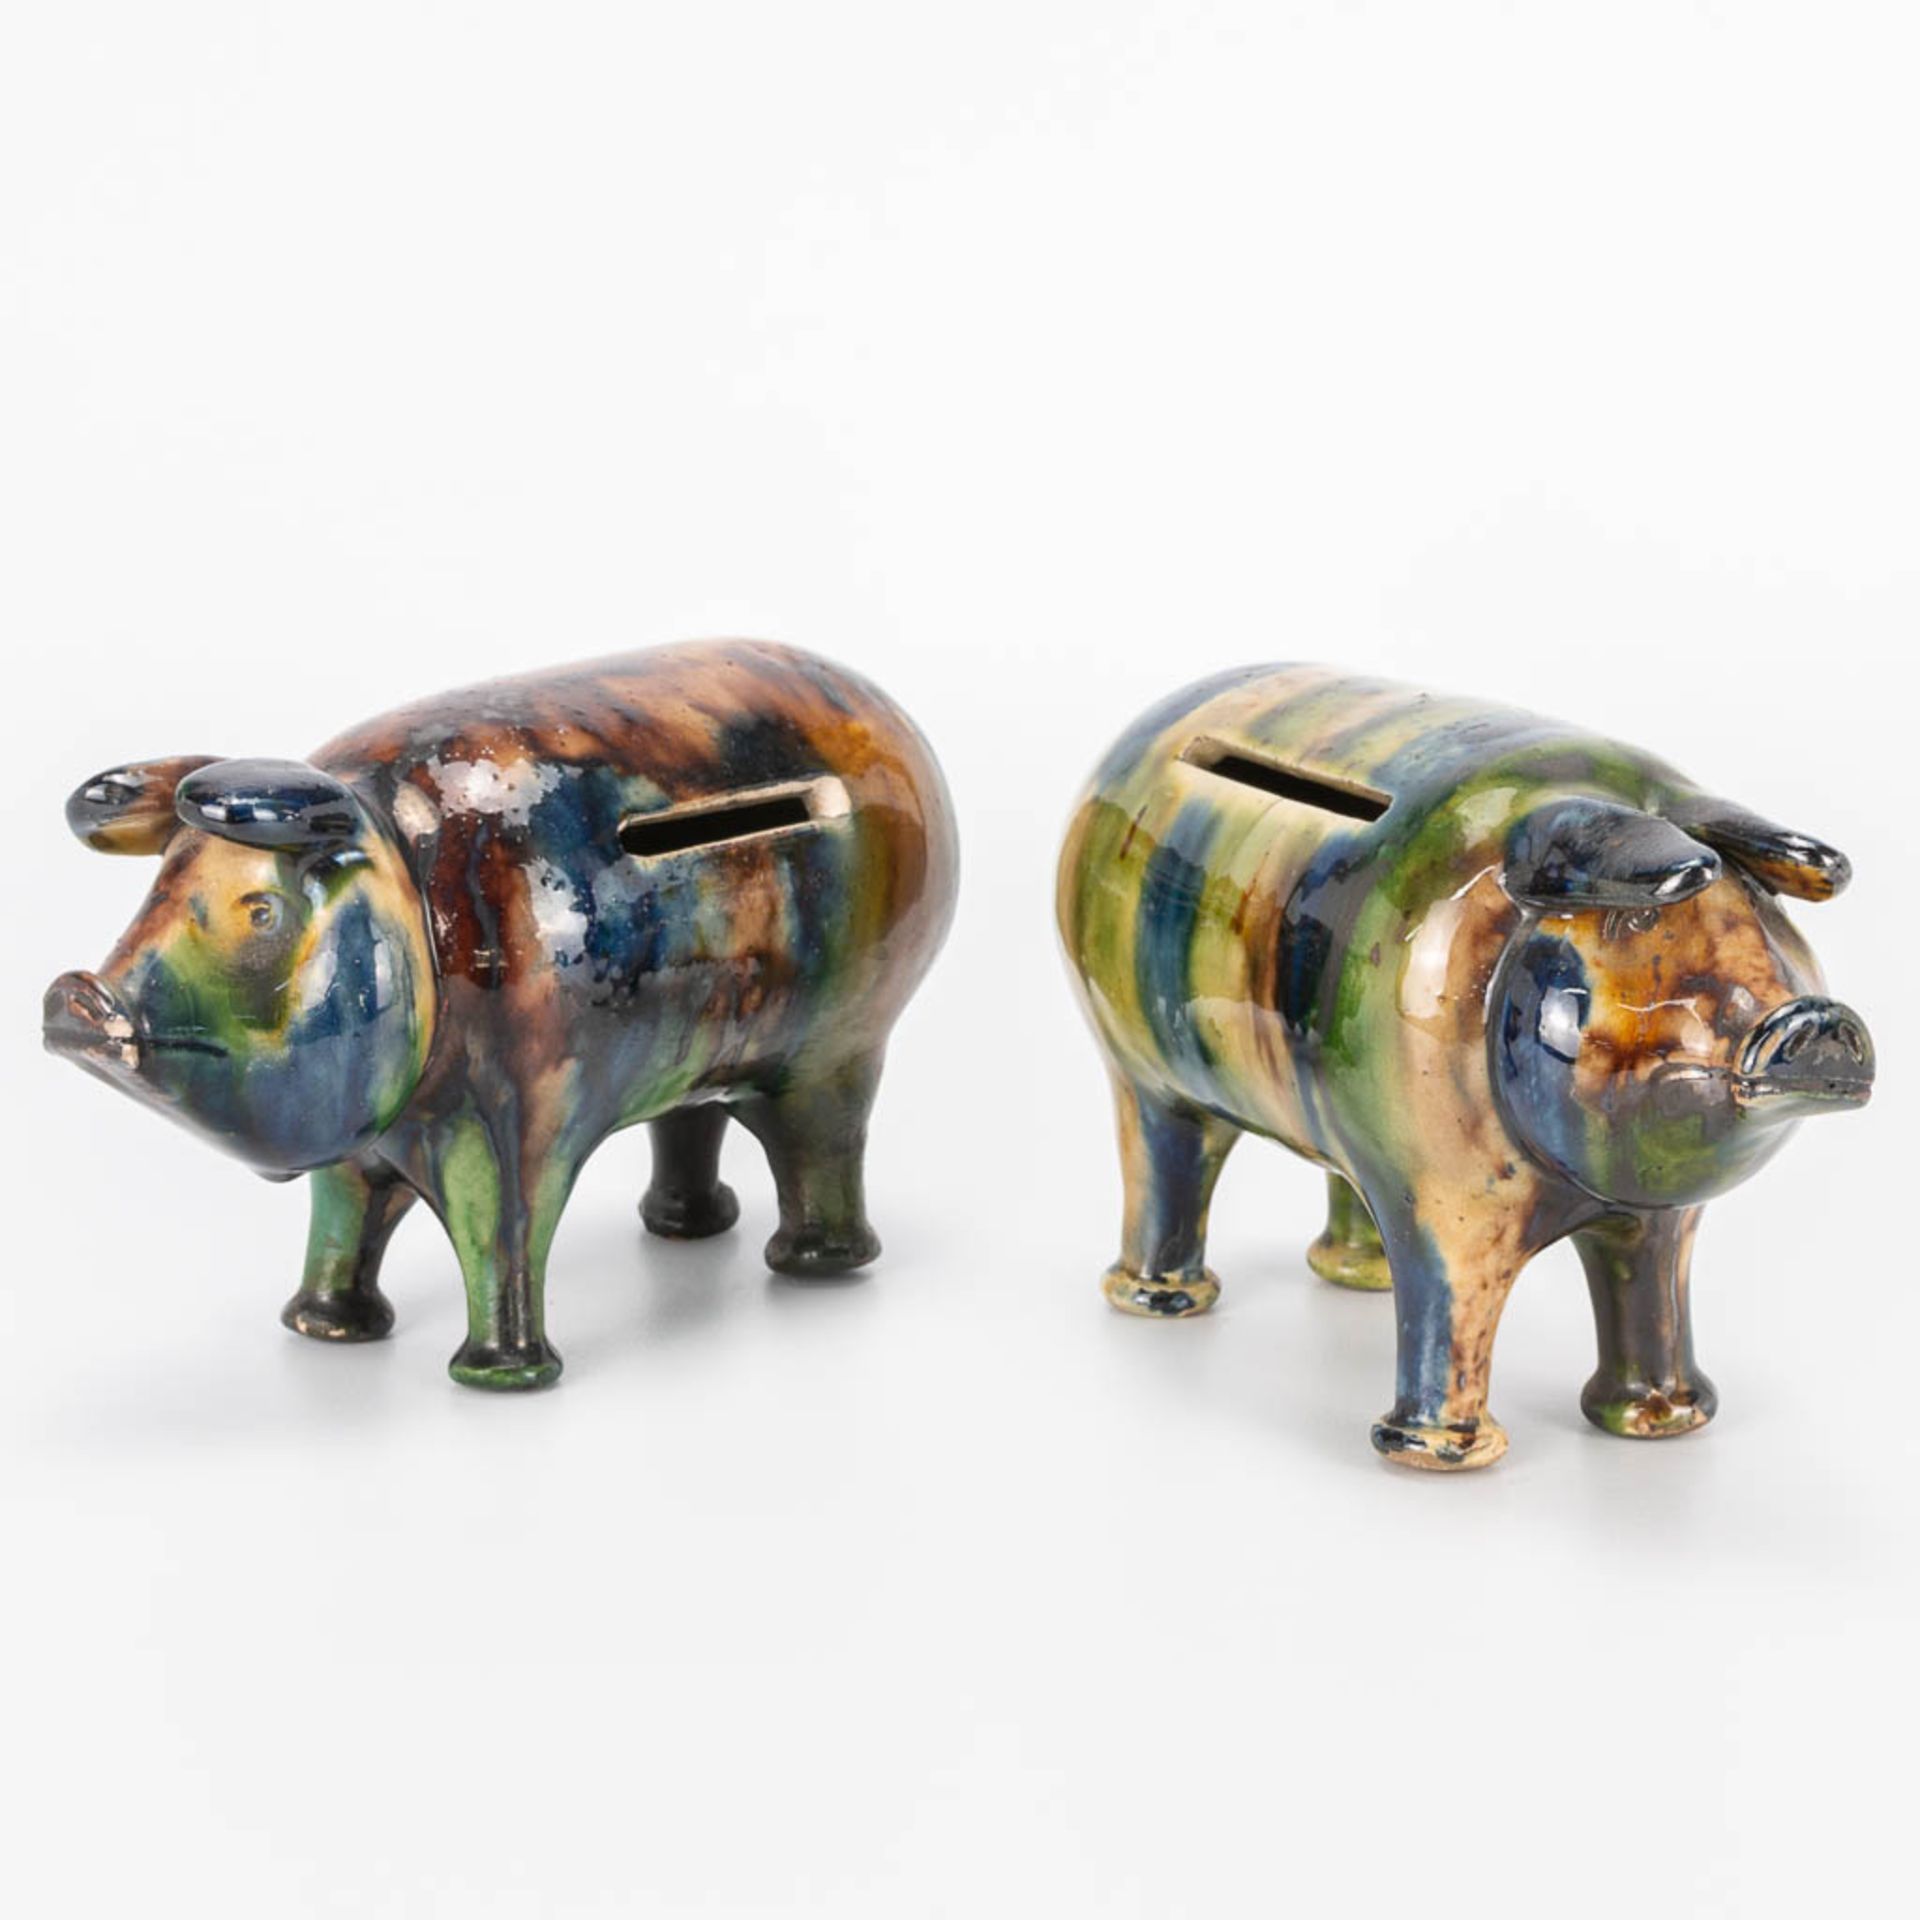 A collection of 2 Piggy banks made of Flemish Earthenware and probably made by Caessens in Kortrijk.